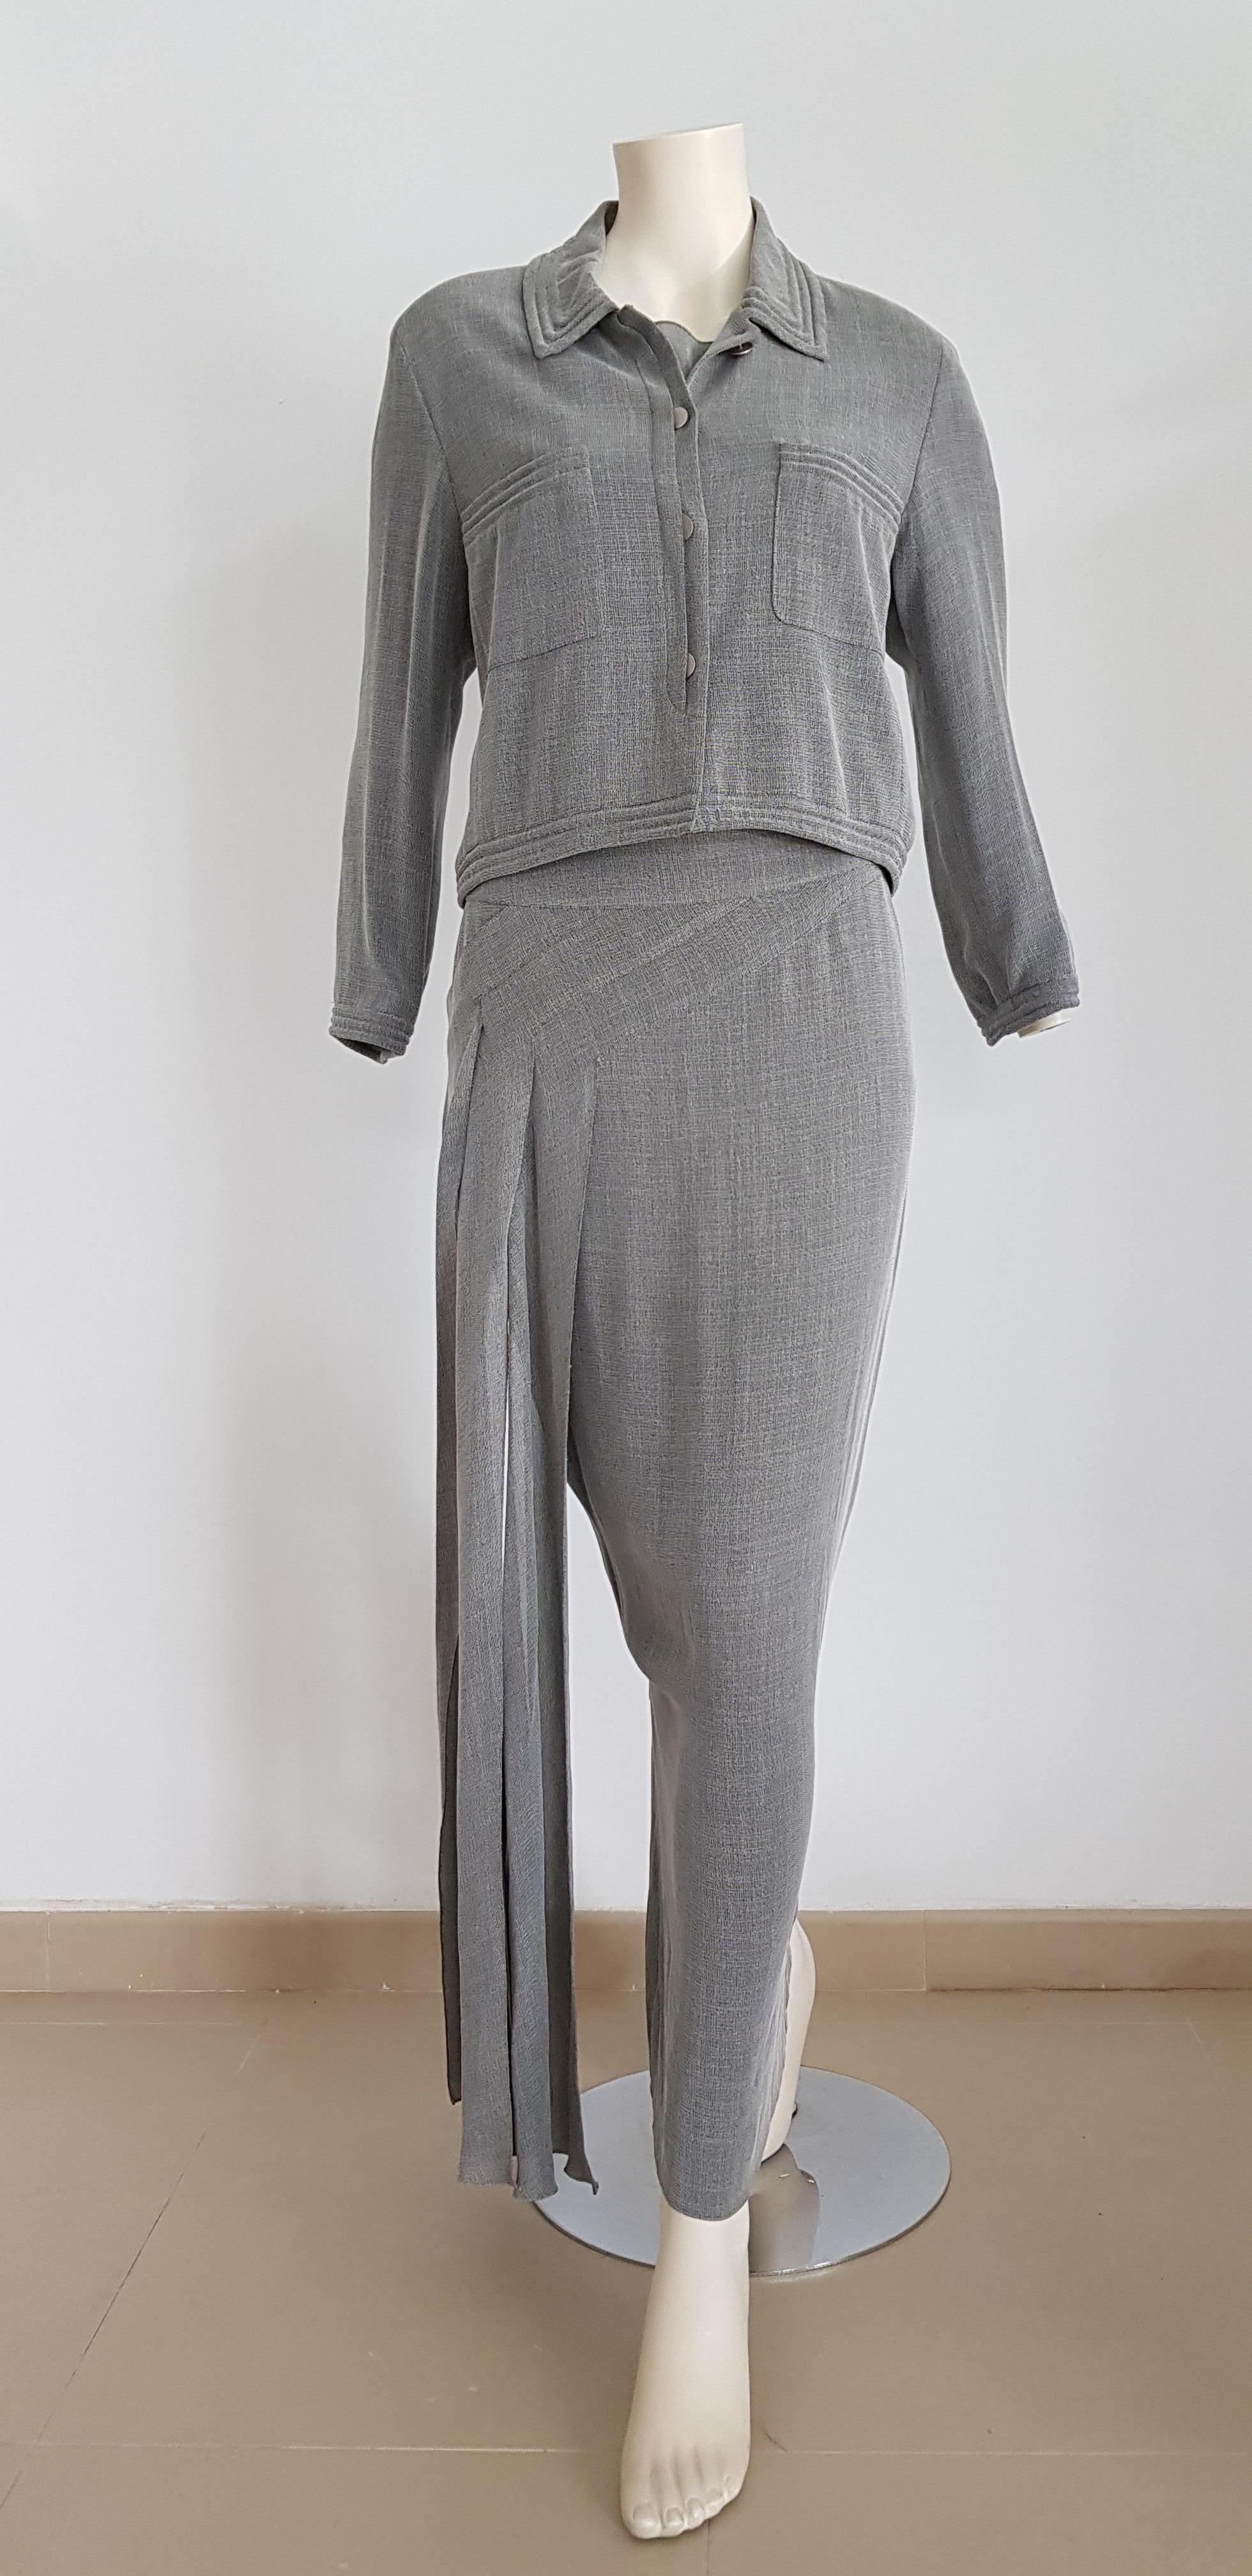 CHANEL Couture jacket and long dress Silk grey coktail suit - Unworn, New.

SIZE: equivalent to about Small / Medium, please review approx measurements as follows in cm. 
JACKET: lenght 55, chest underarm to underarm 48, bust circumference 96,